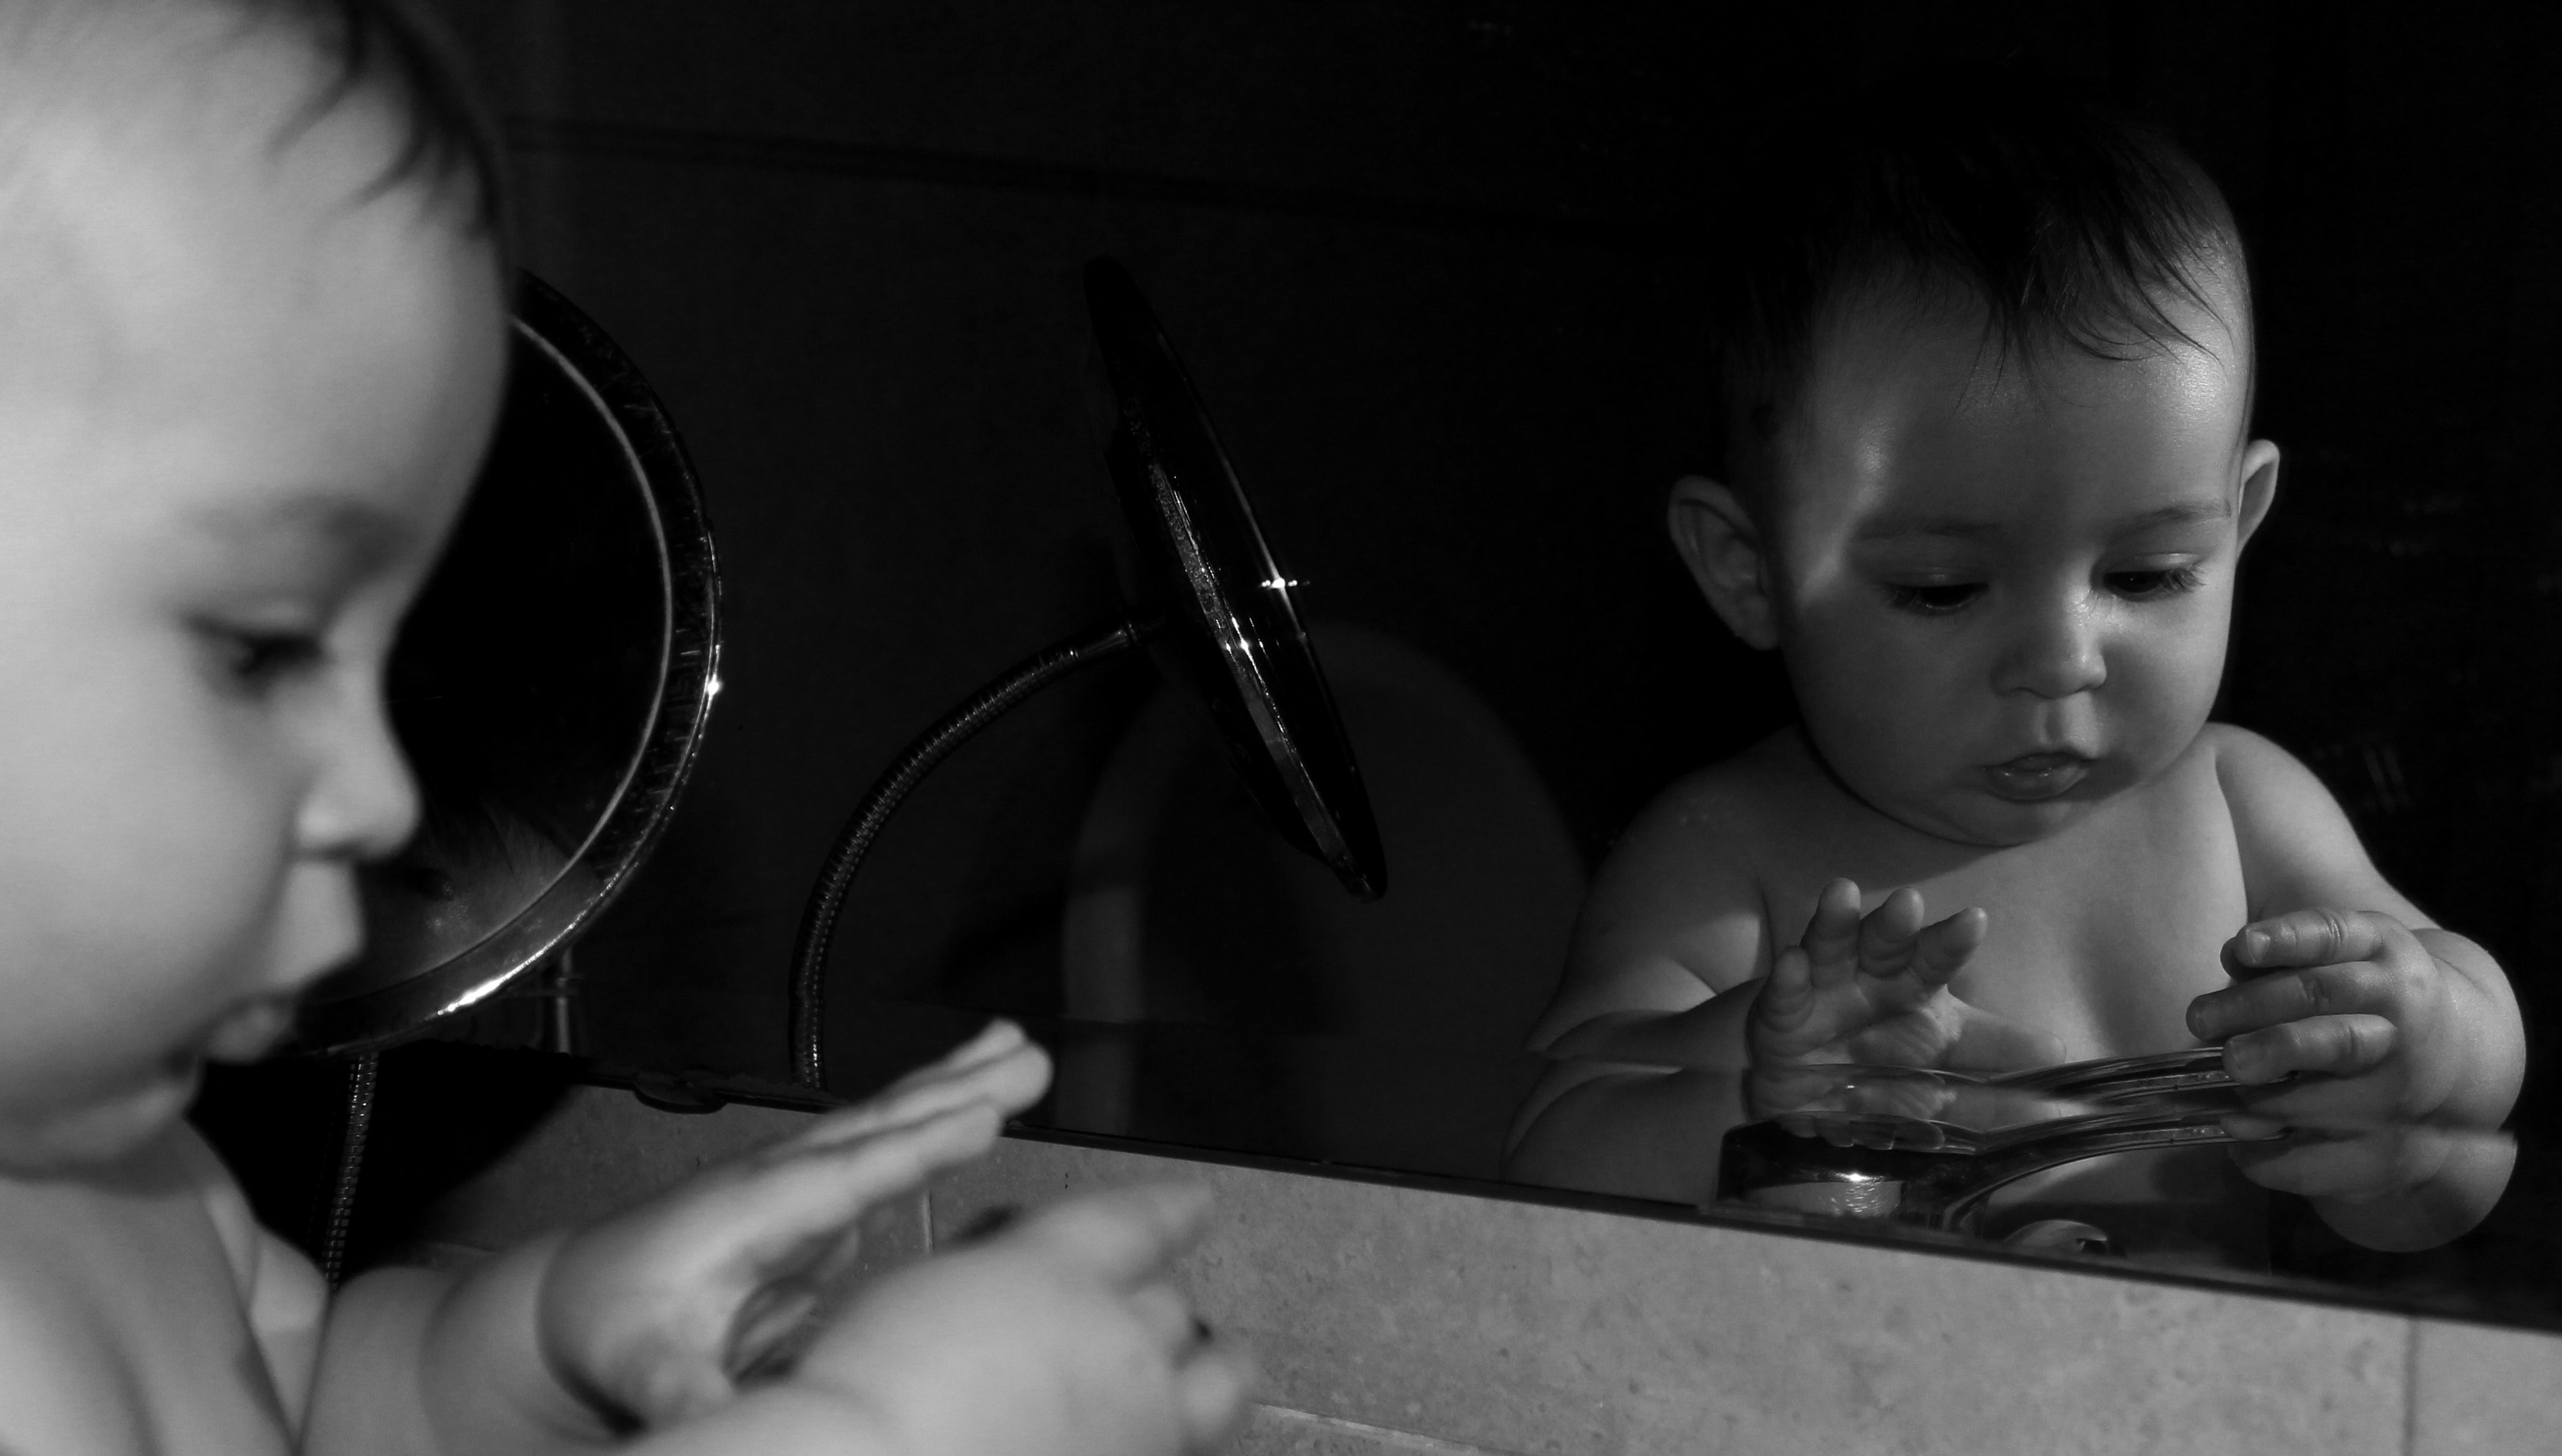 Baby in the mirror photo